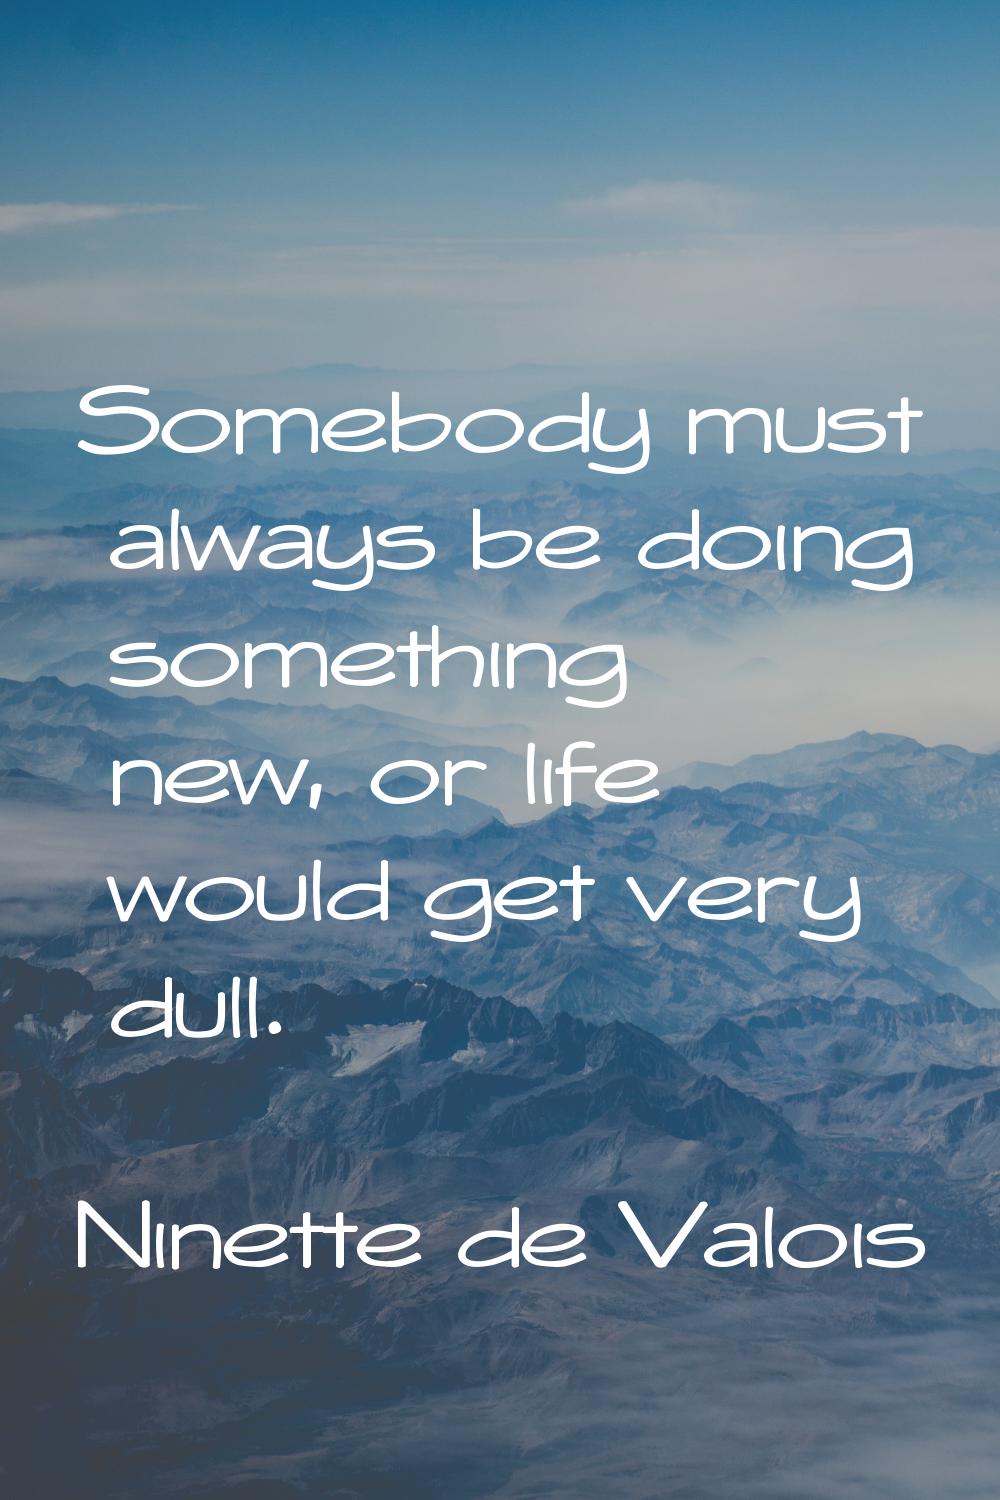 Somebody must always be doing something new, or life would get very dull.